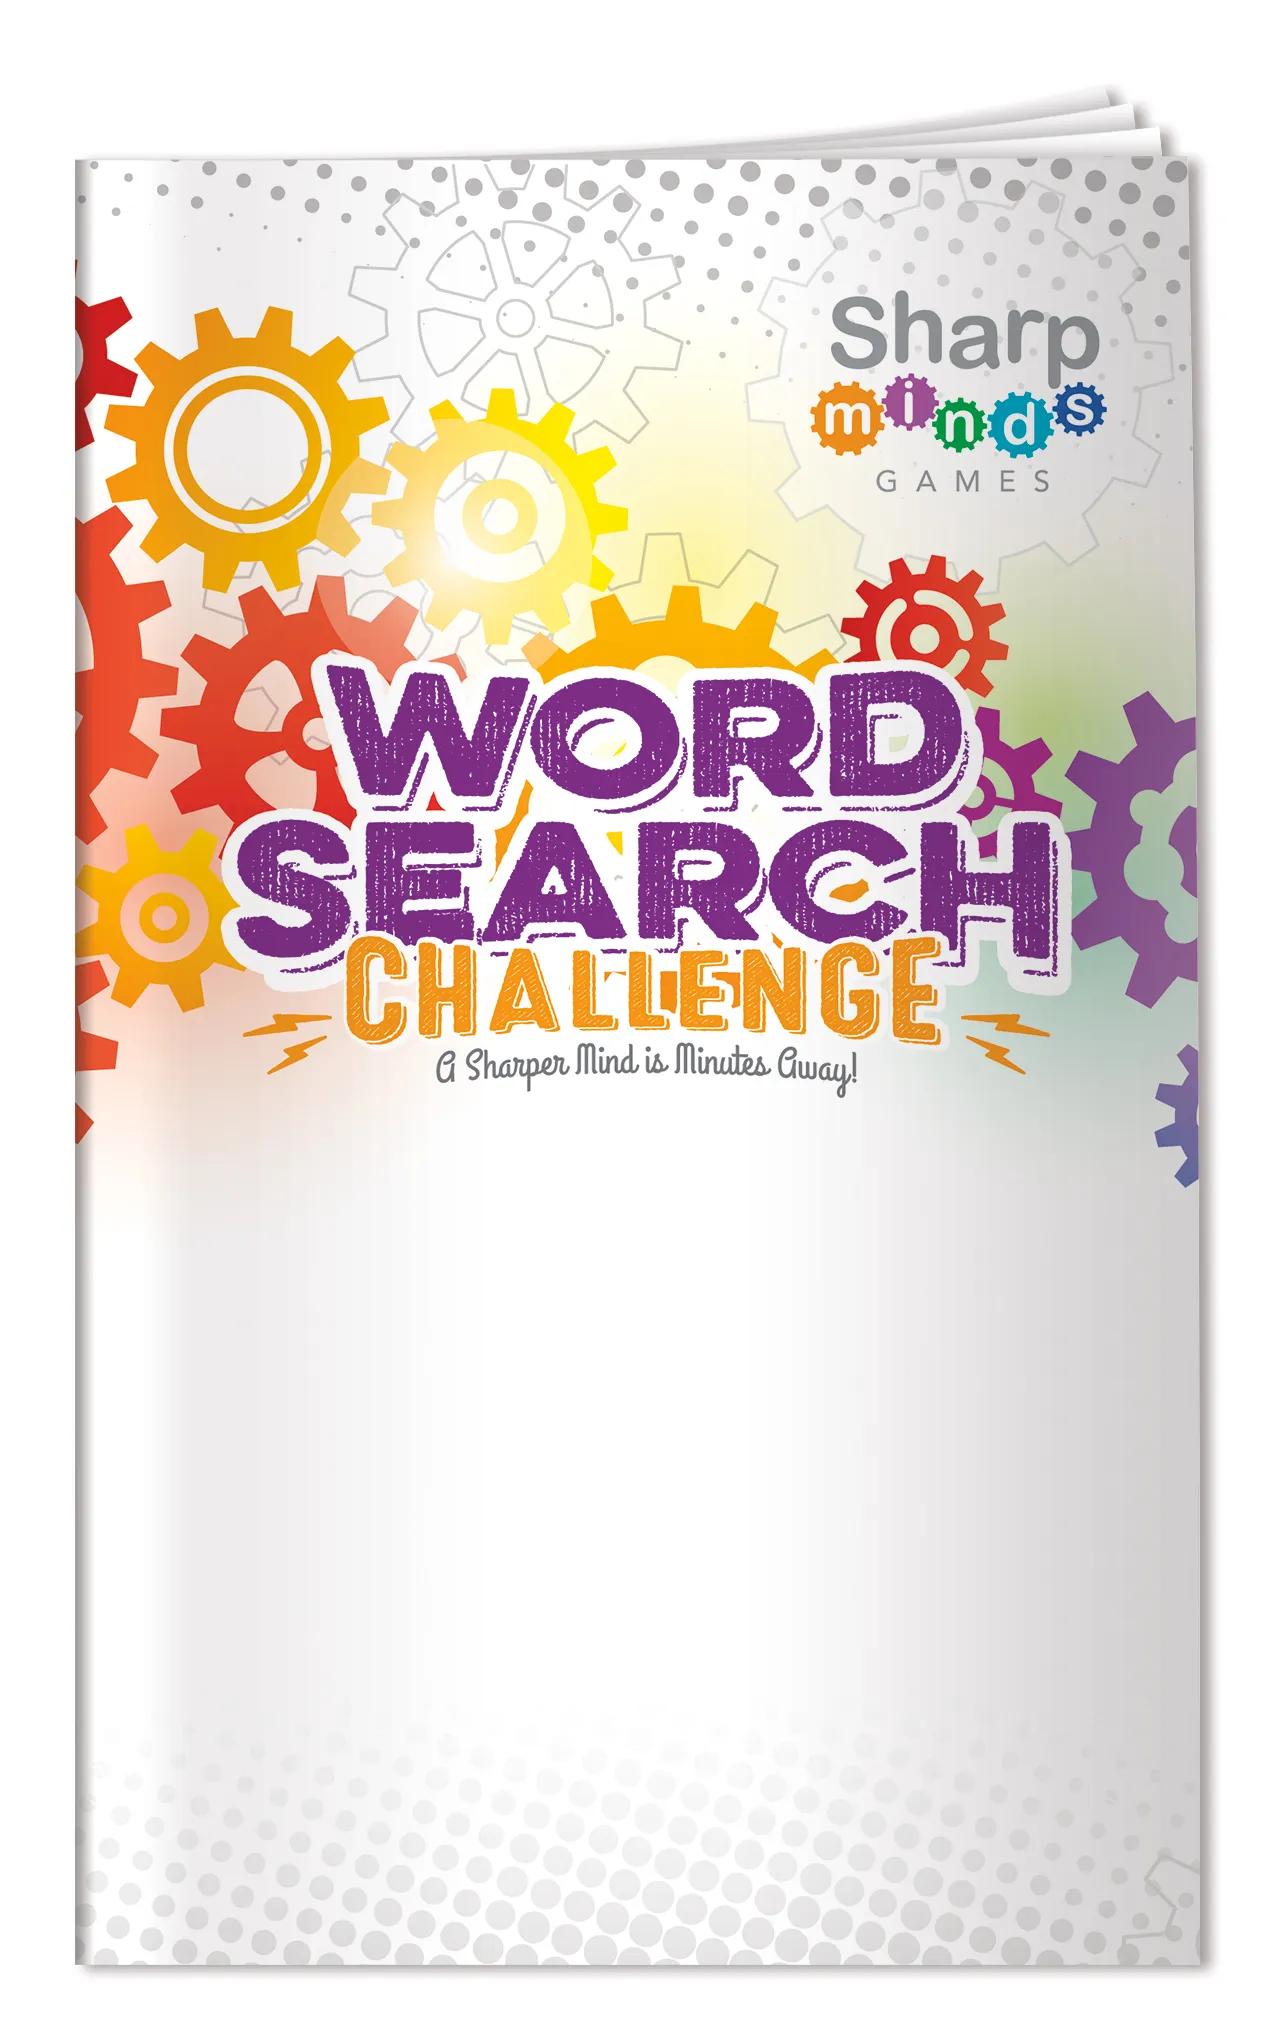 Sharp Minds Games: Word Searches Challenge 3 of 8